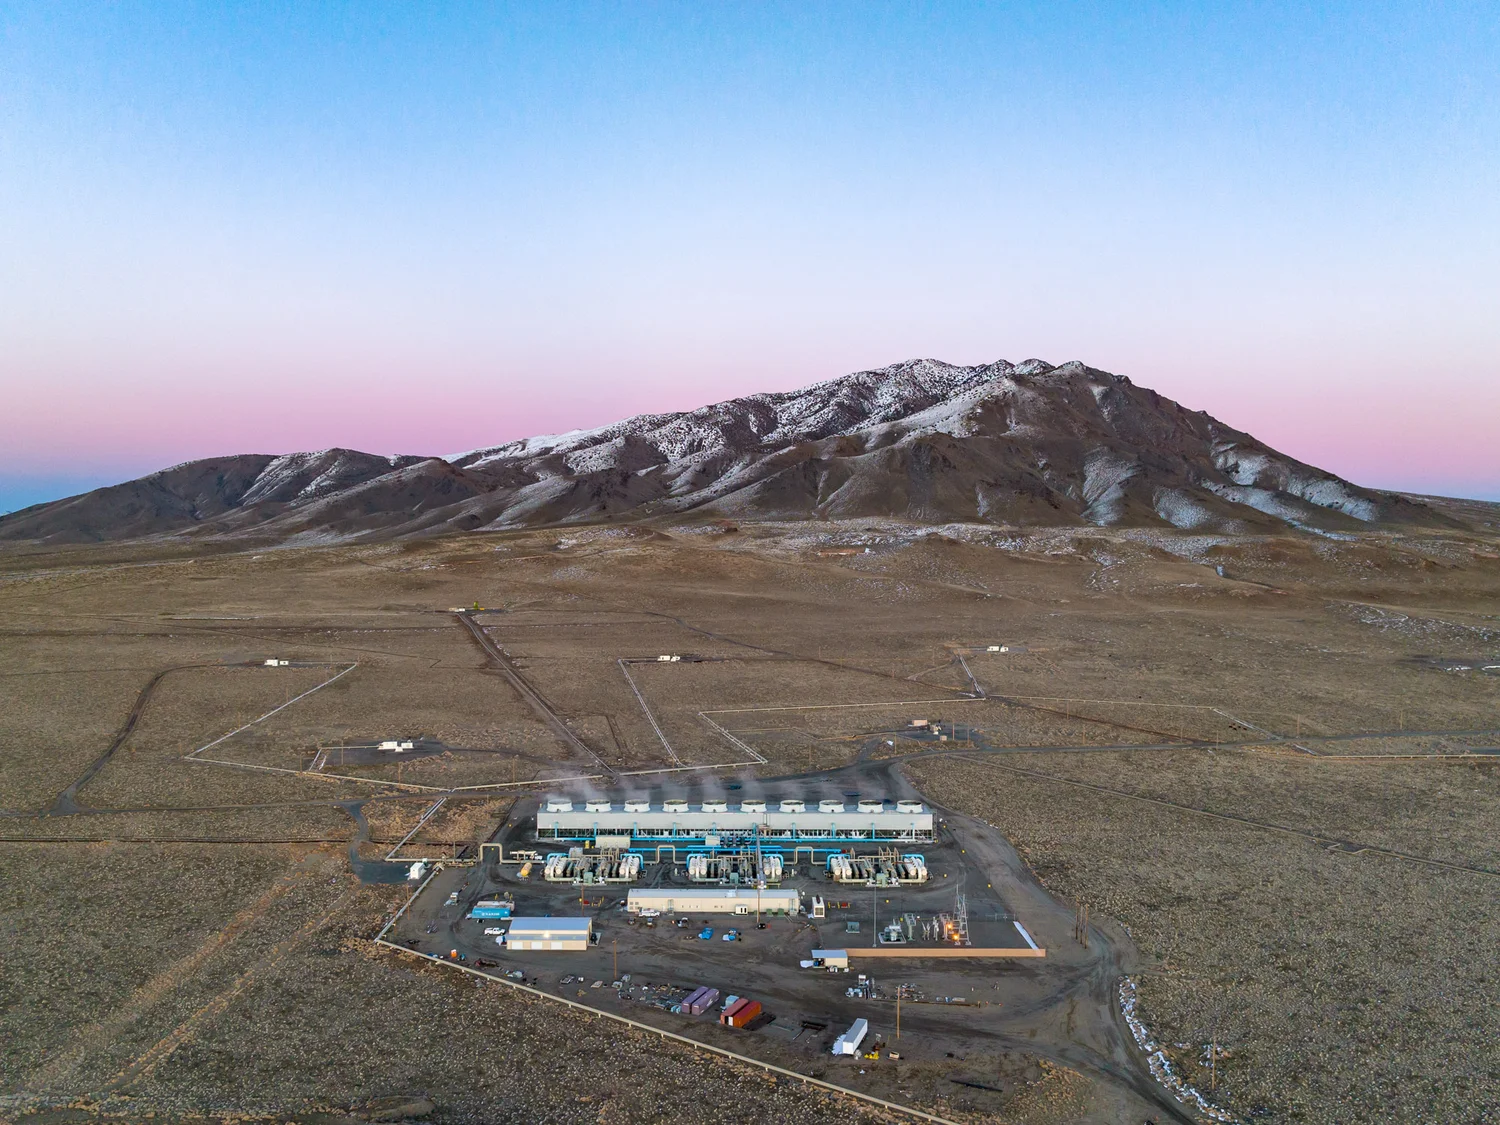 Google Supplies its Data Centers with Geothermal Electricity